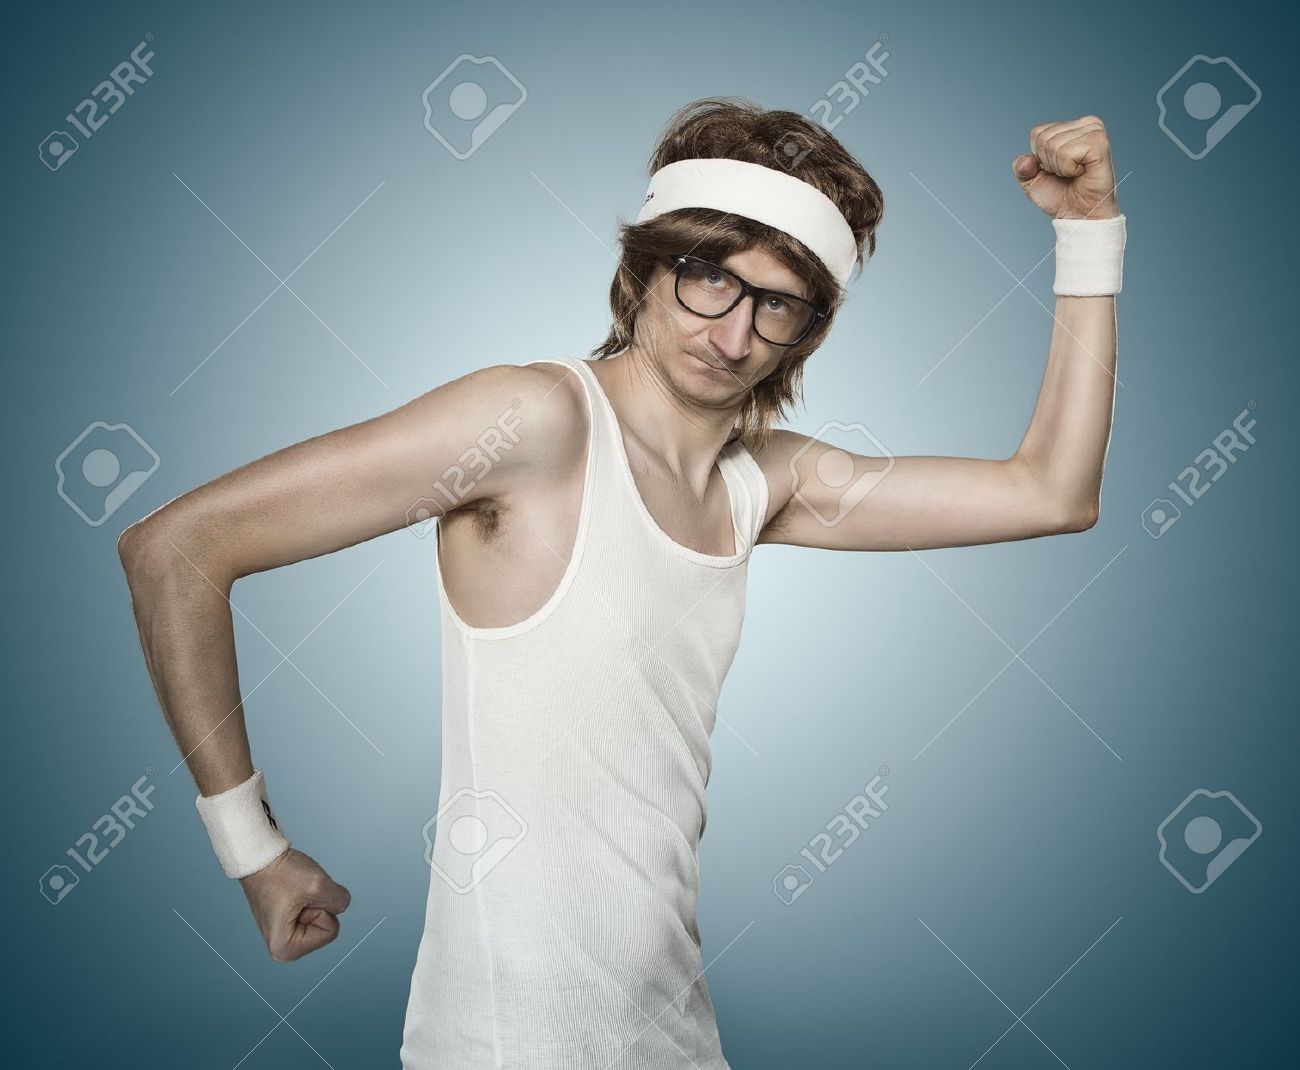 17850356-Funny-retro-sports-nerd-flexing-his-muscle-over-blue-background-Stock-Photo.jpg